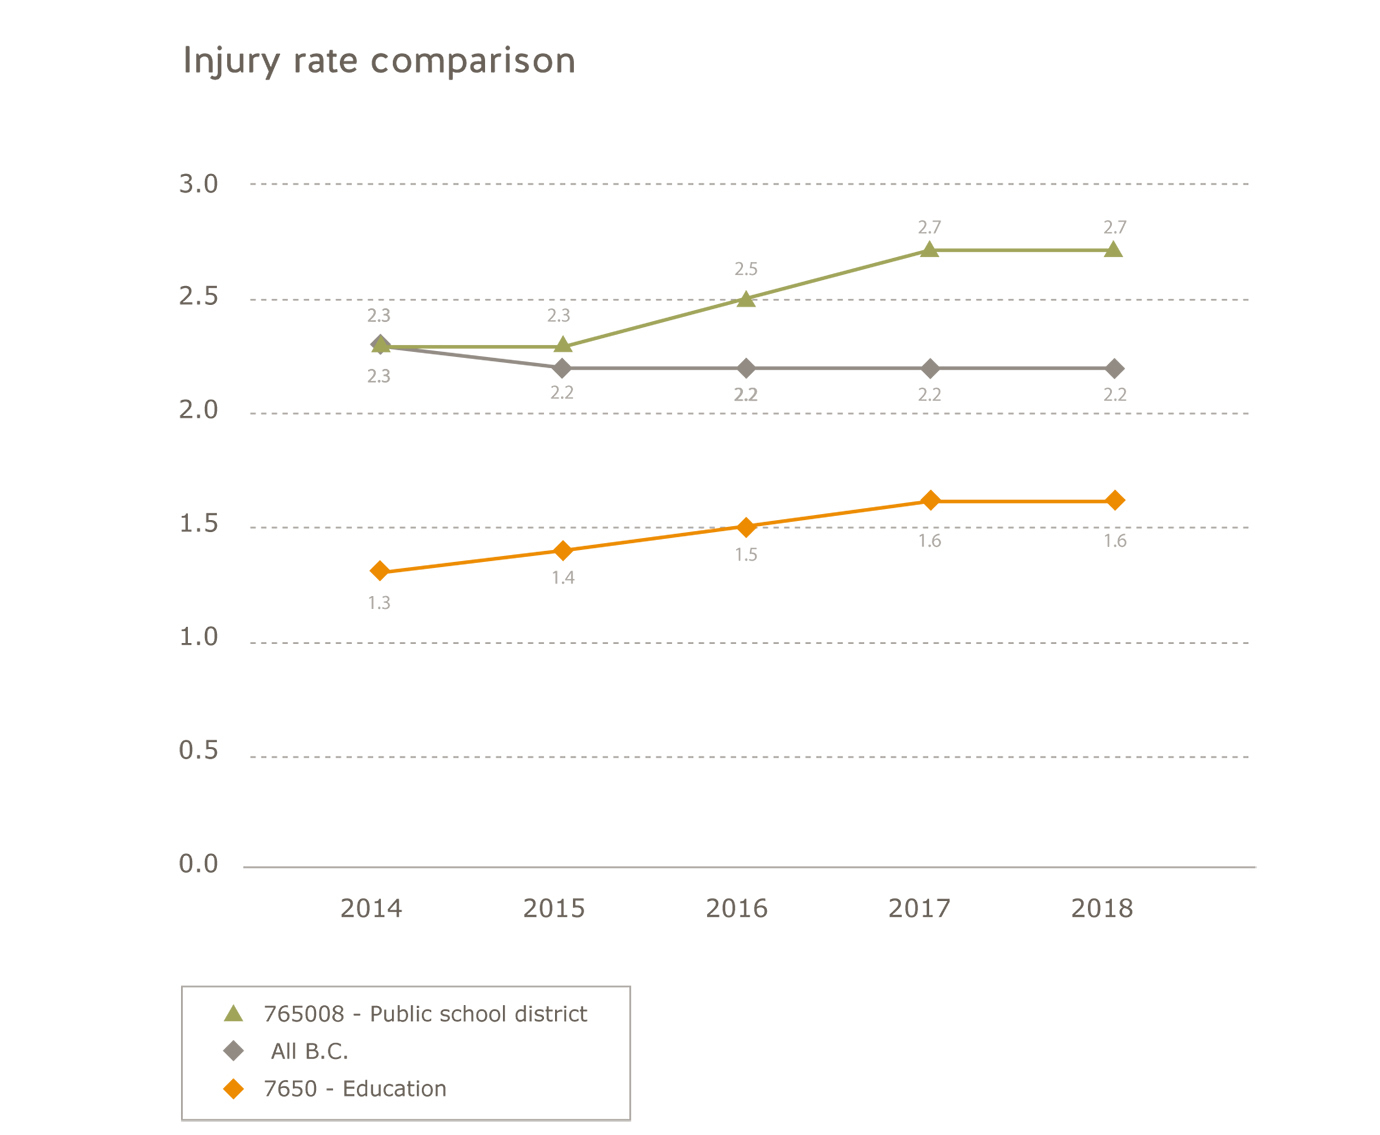 Injury rate comparison for 2014 to 2018. All B.C.: 2014=2.3; 2015=2.2; 2016=2.2; 2017=2.2; 2018=2.2. Education: 2014=1.3; 2015=1.4; 2016=1.5; 2017=1.6; 2018=1.6. Public school district: 2014=2.3; 2015=2.3; 2016=2.5; 2017=2.7; 2018=2.7.